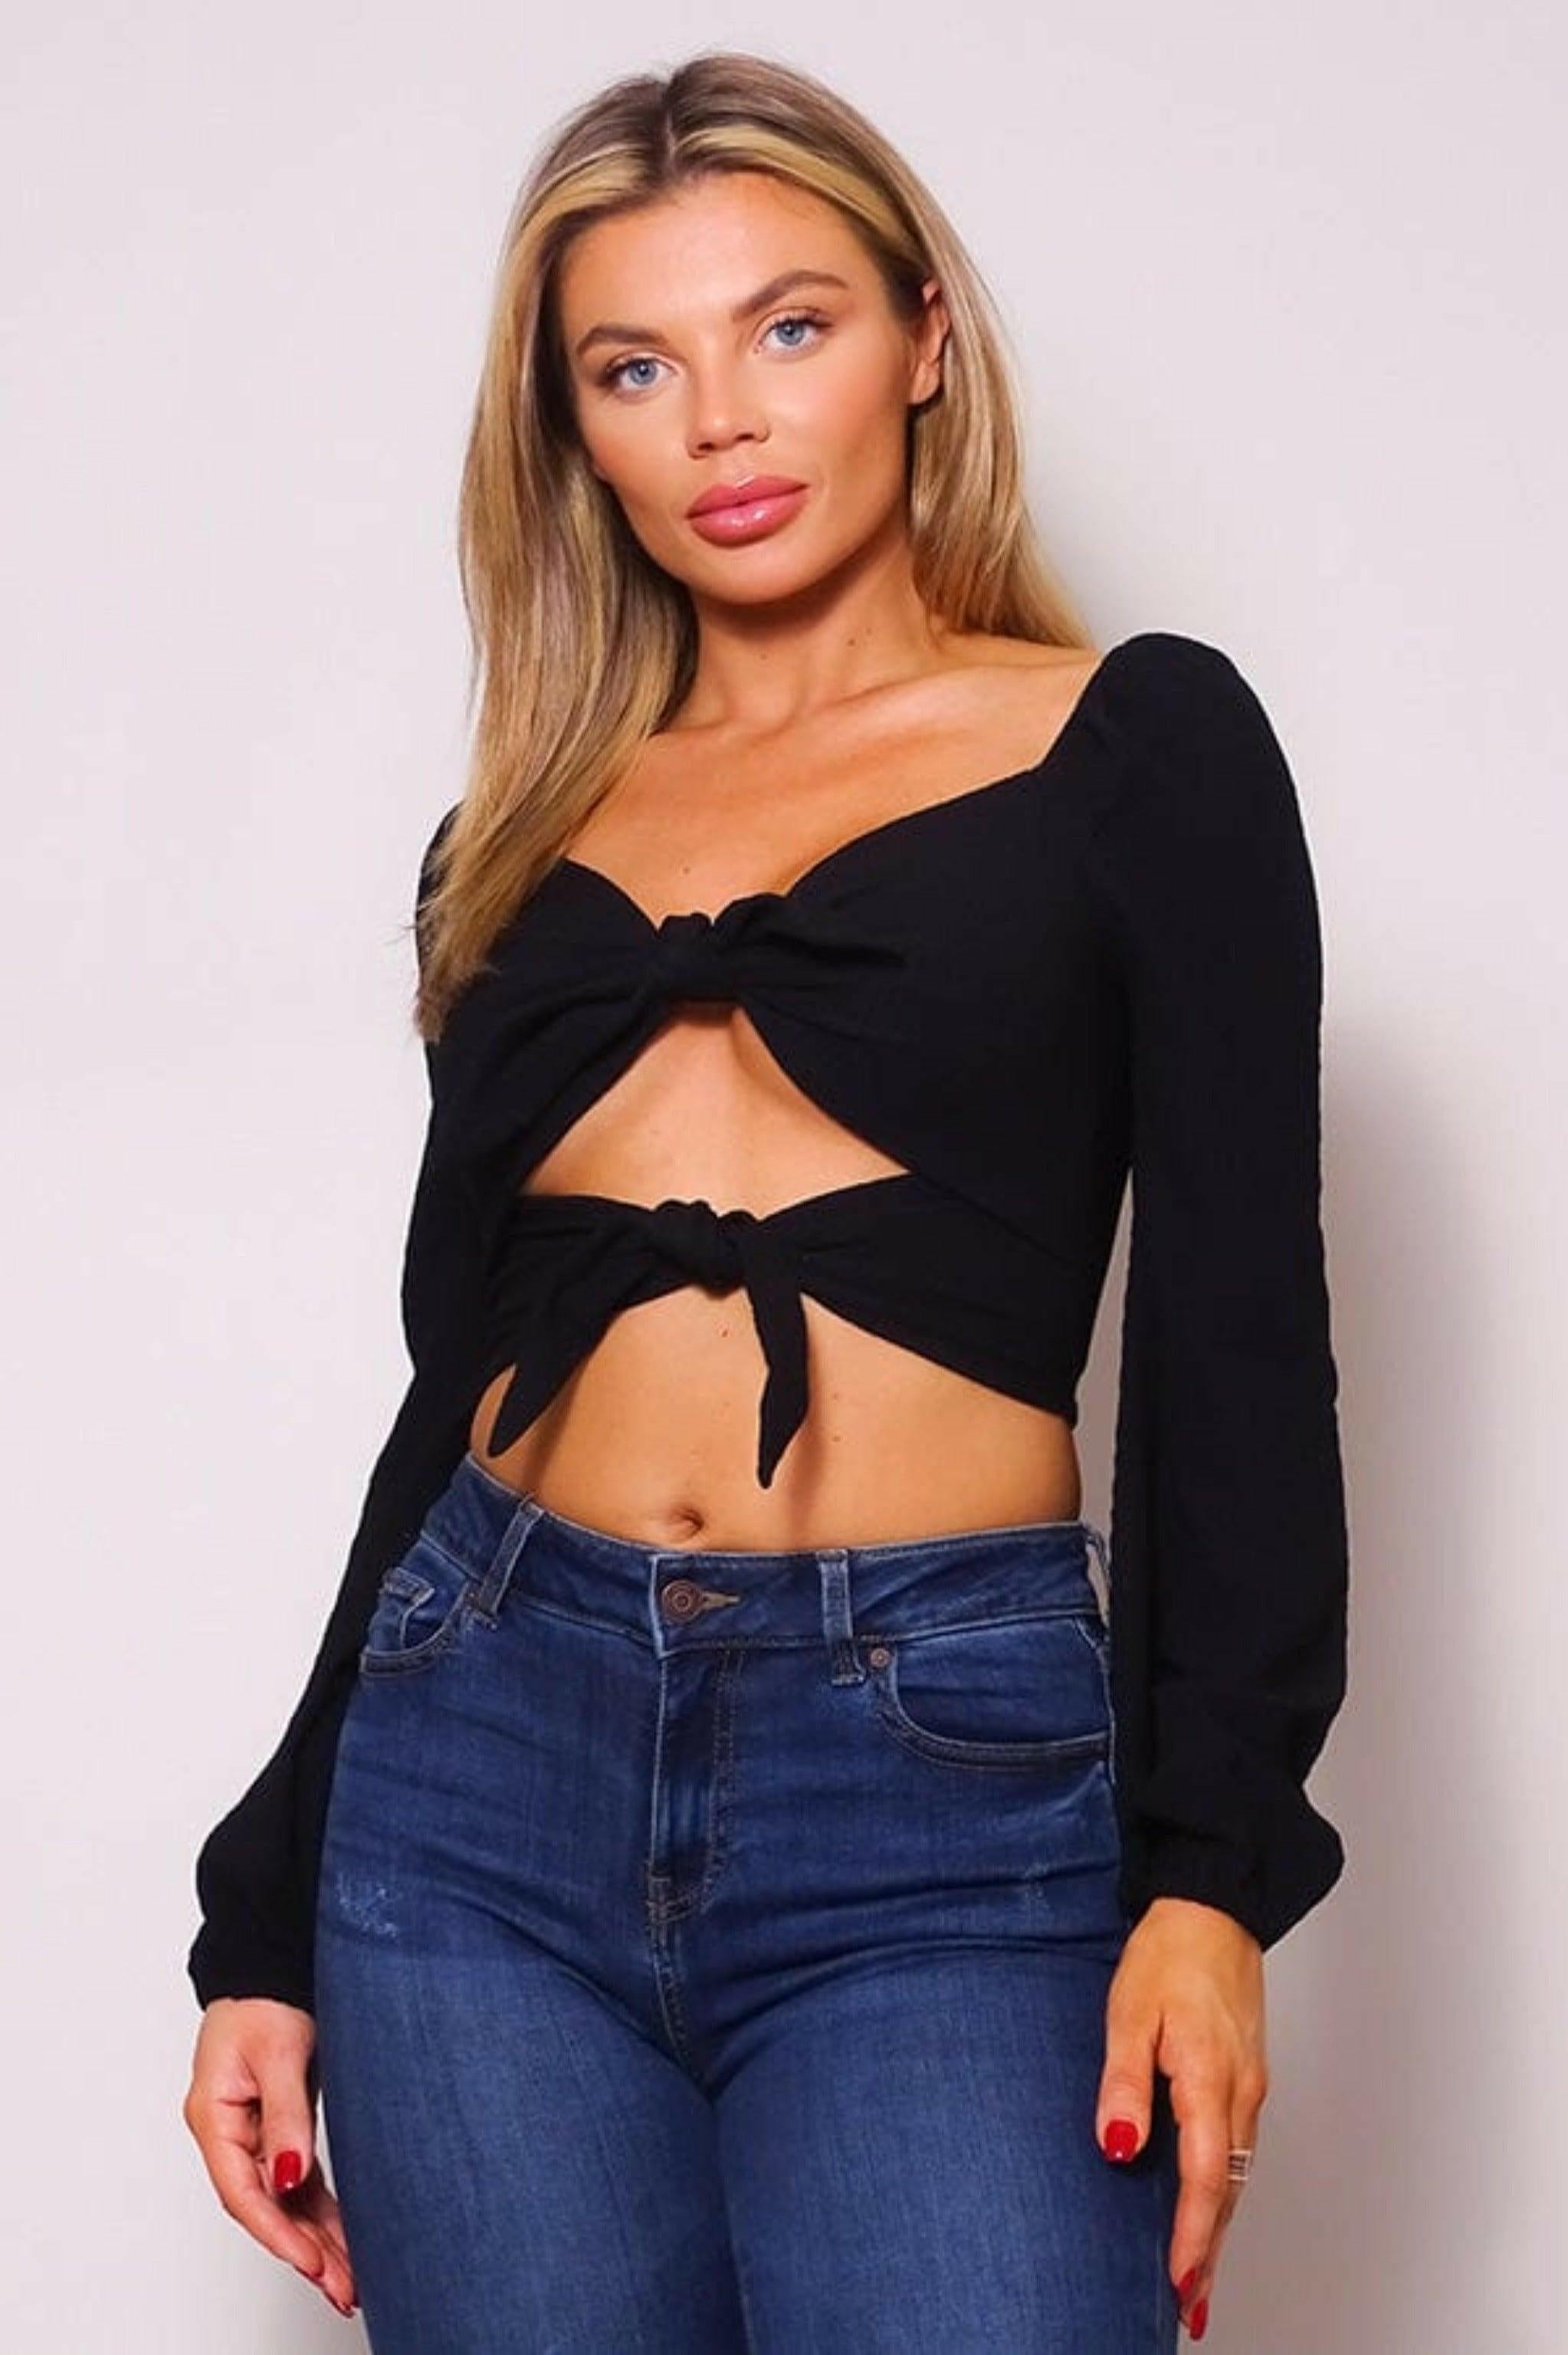 Epicplacess tops SMALL / BLACK / UNITED STATES SPECIAL V AMORE FRONT TIE CROP TOPS CT10215